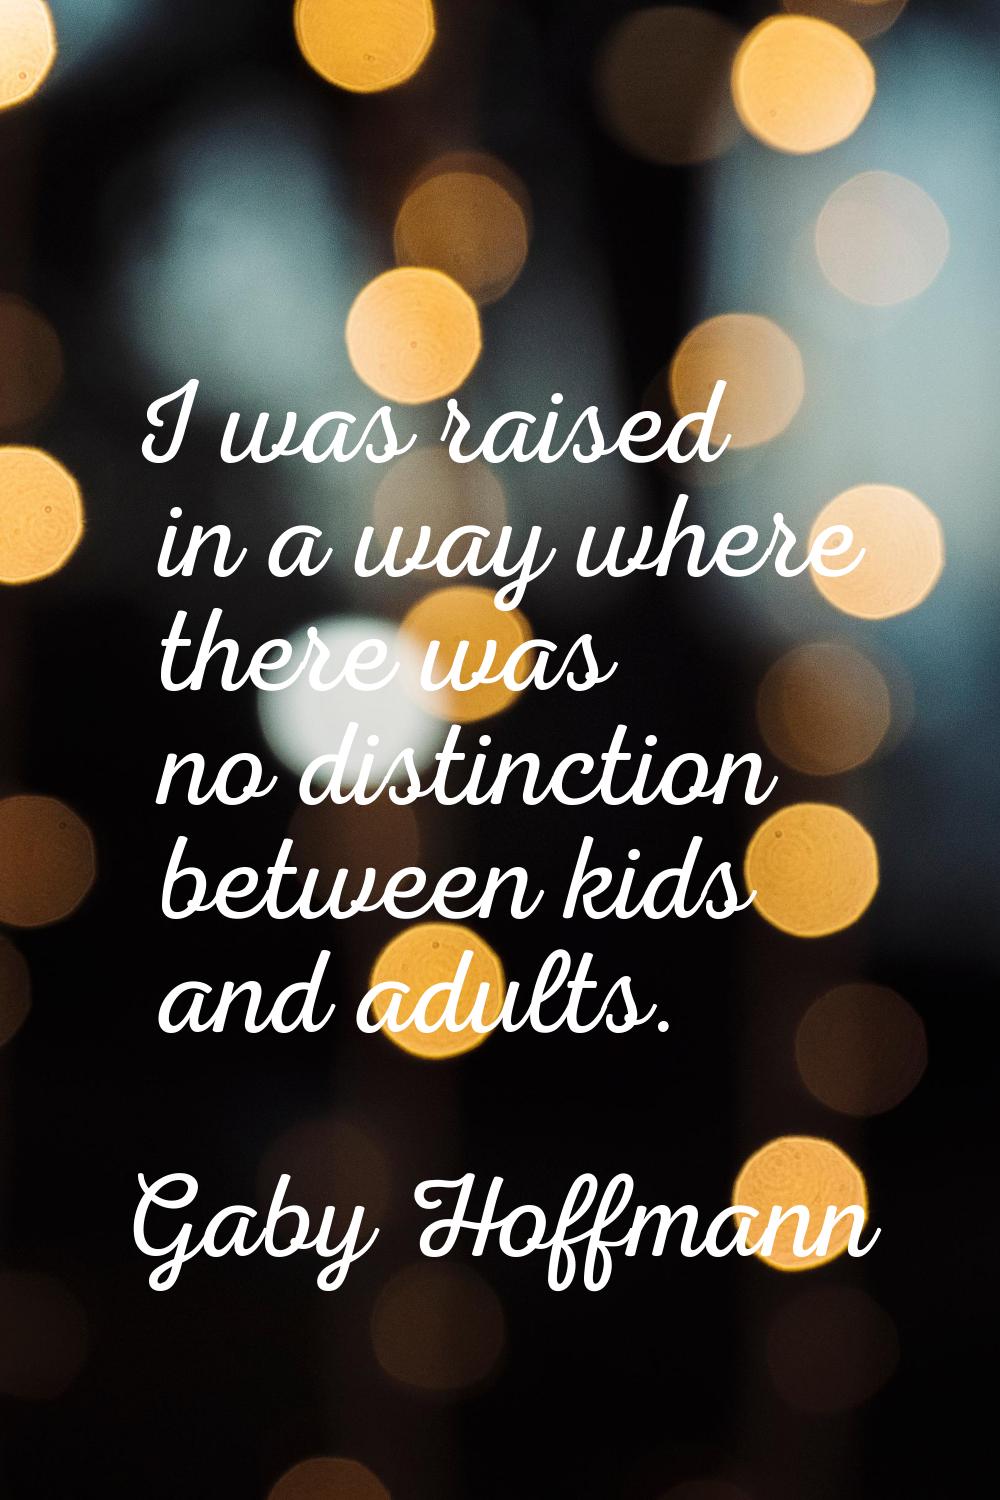 I was raised in a way where there was no distinction between kids and adults.